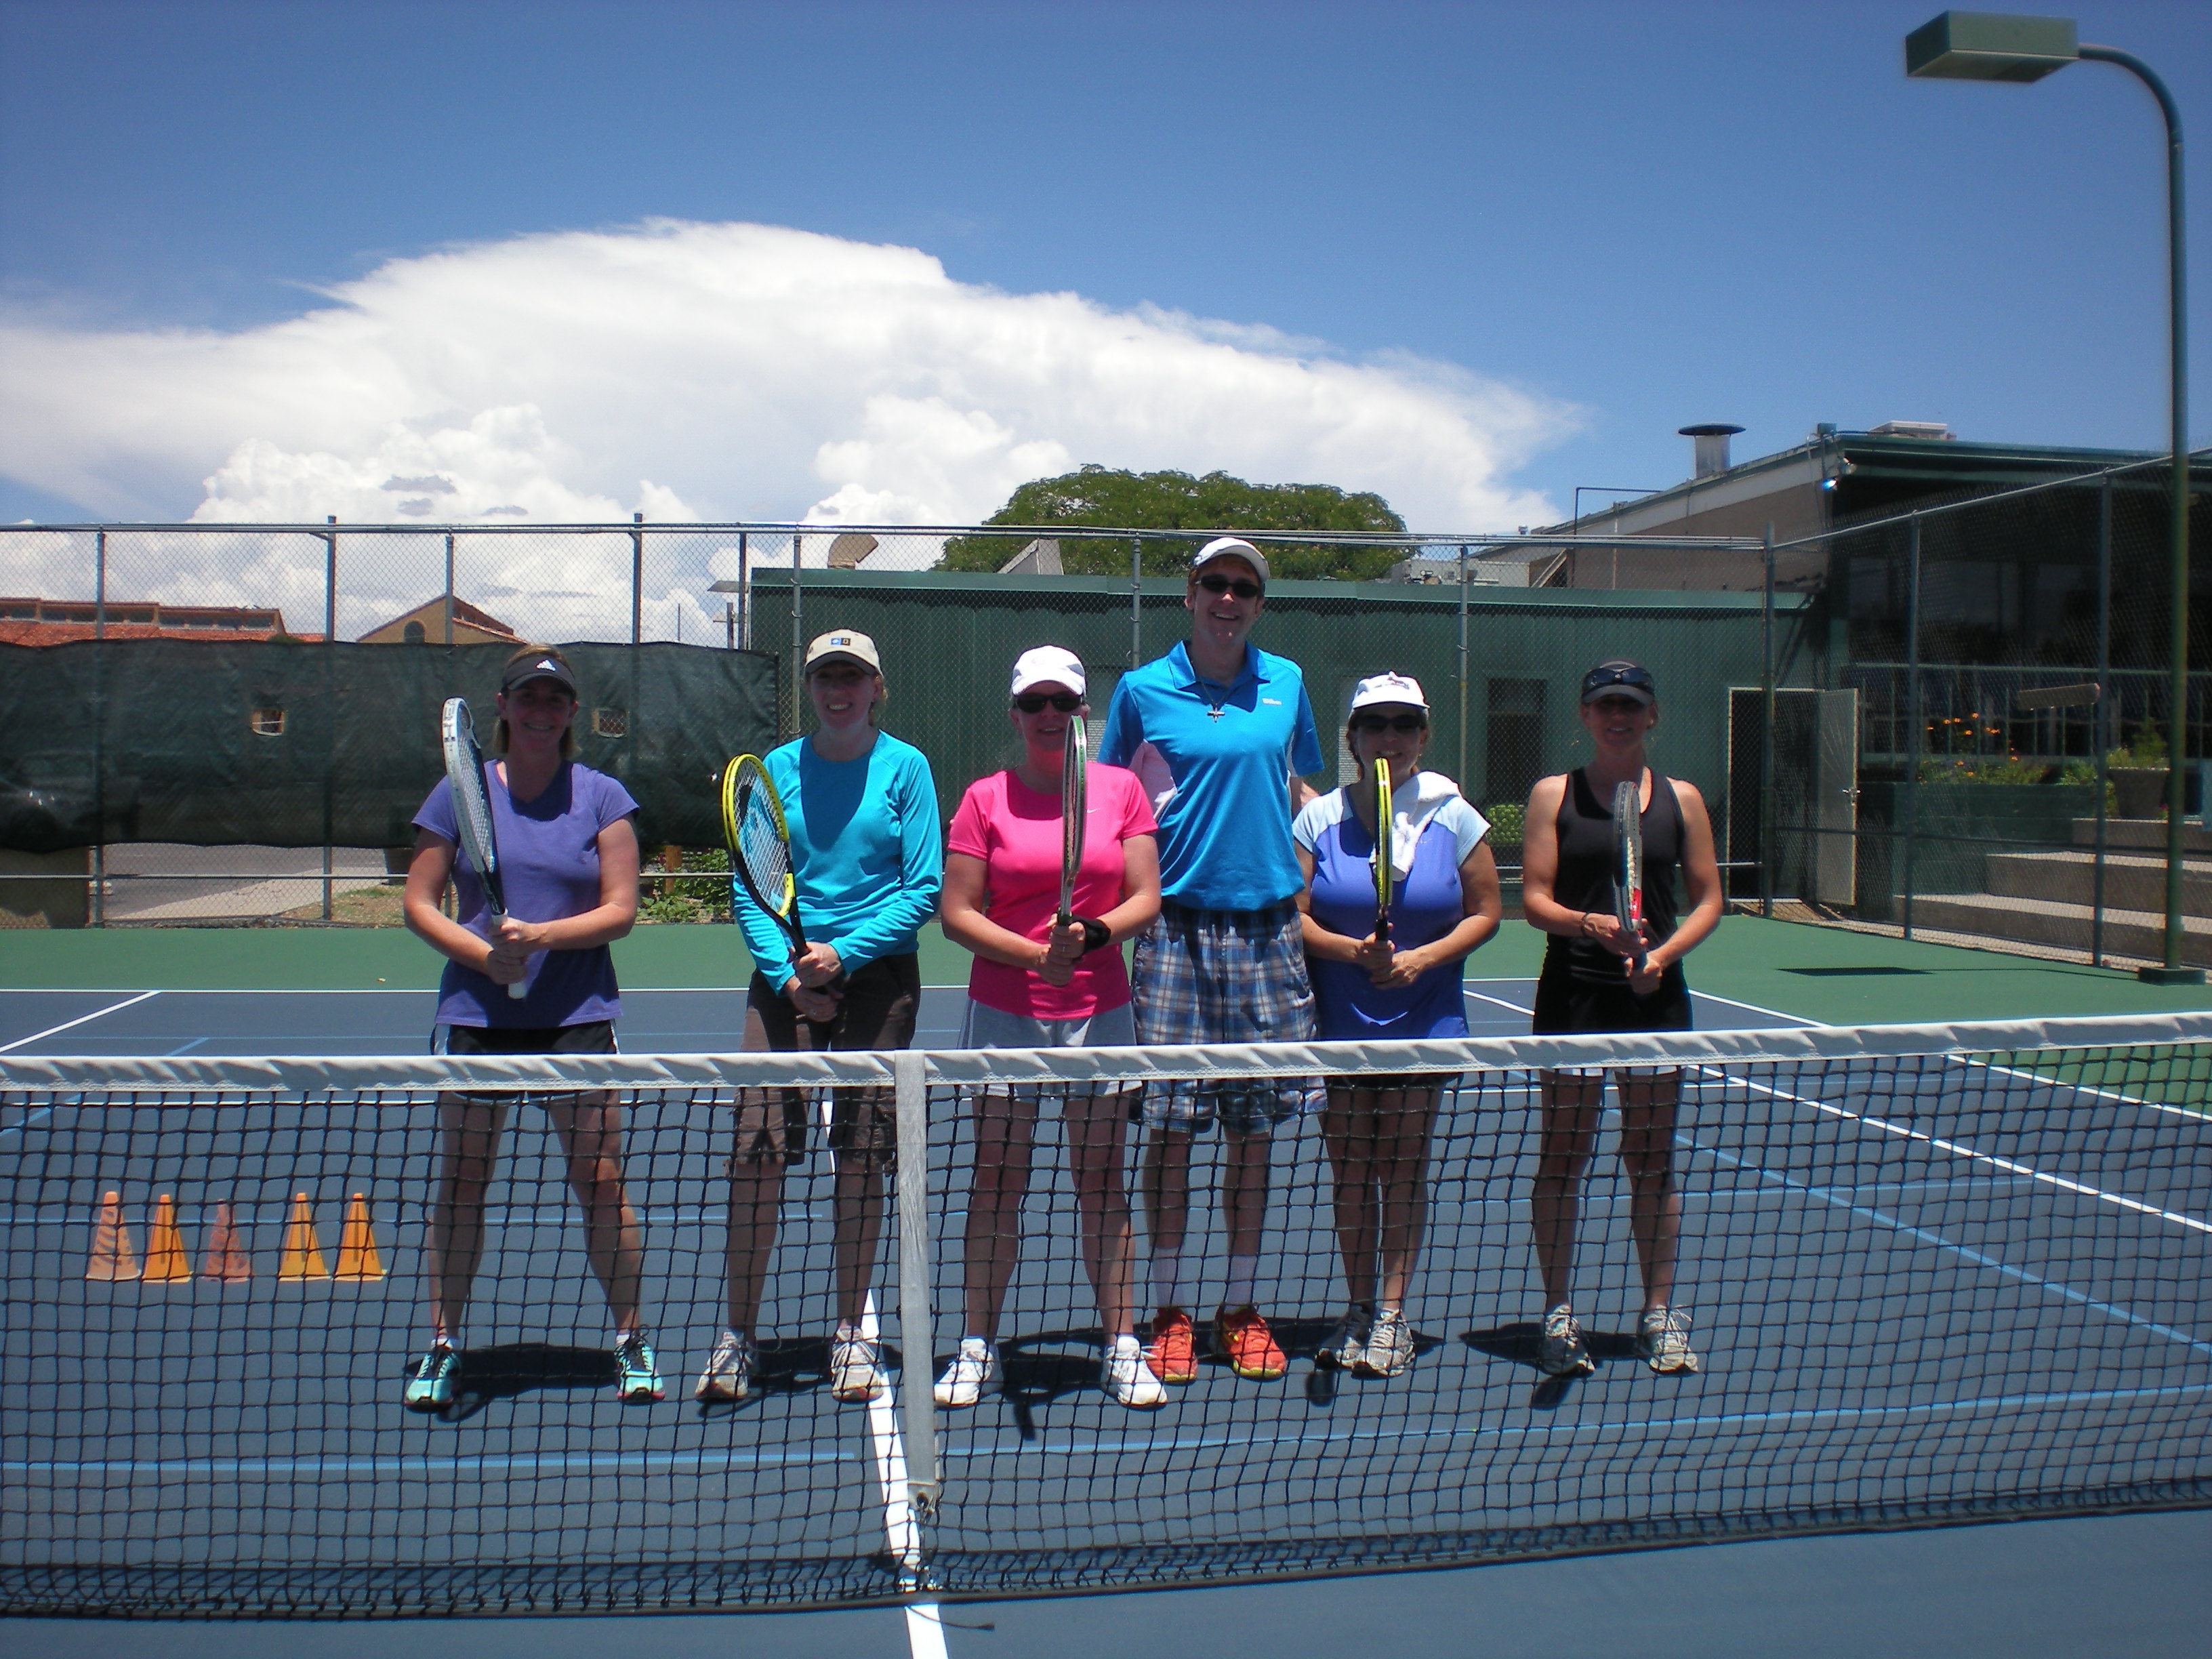 Adult CO-ED Tennis Clinic Sunday July 14 for 4 weeks